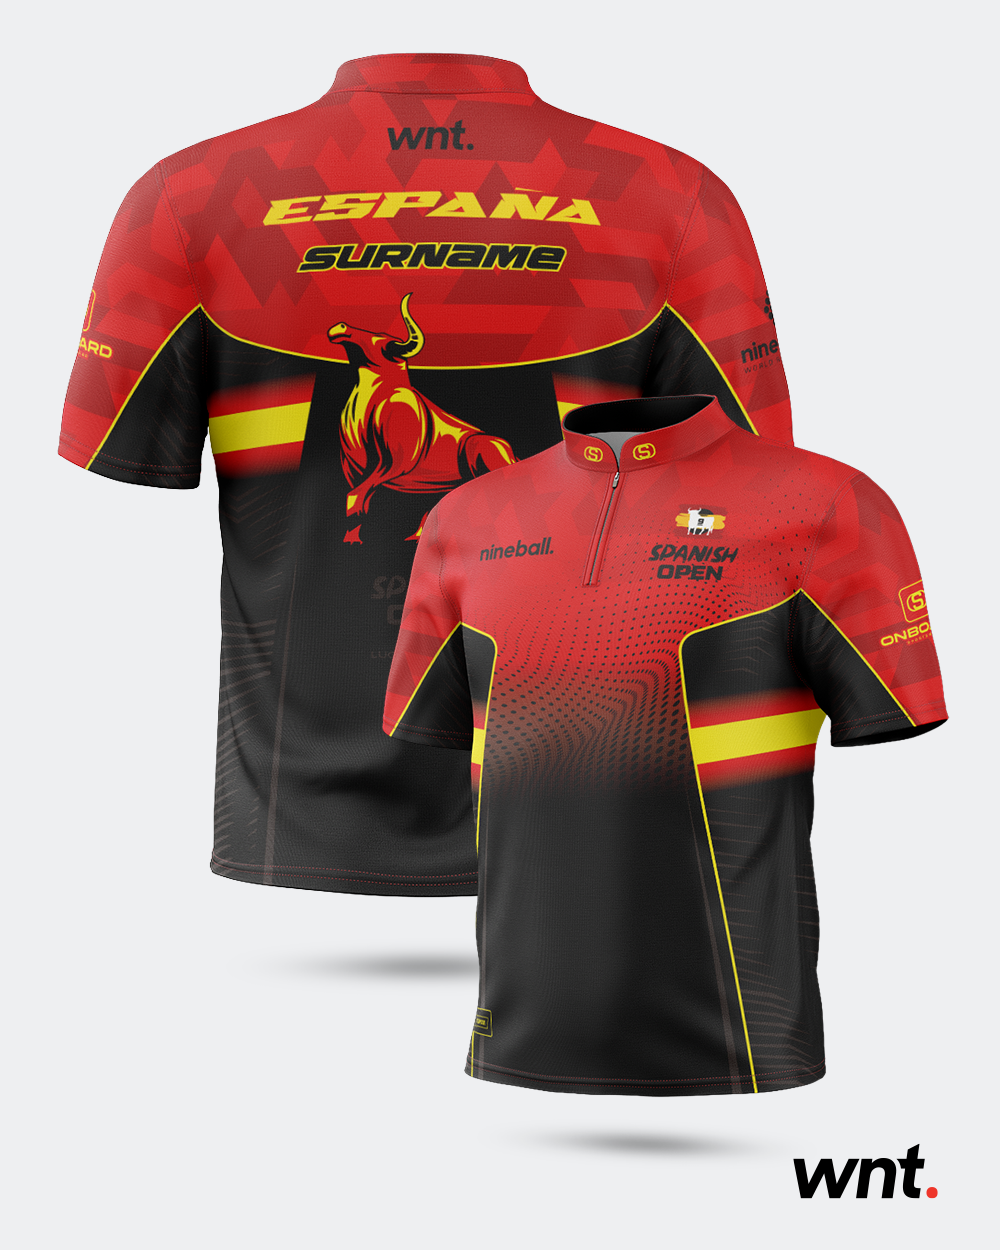 Official 2023 Spanish Open Event Jersey